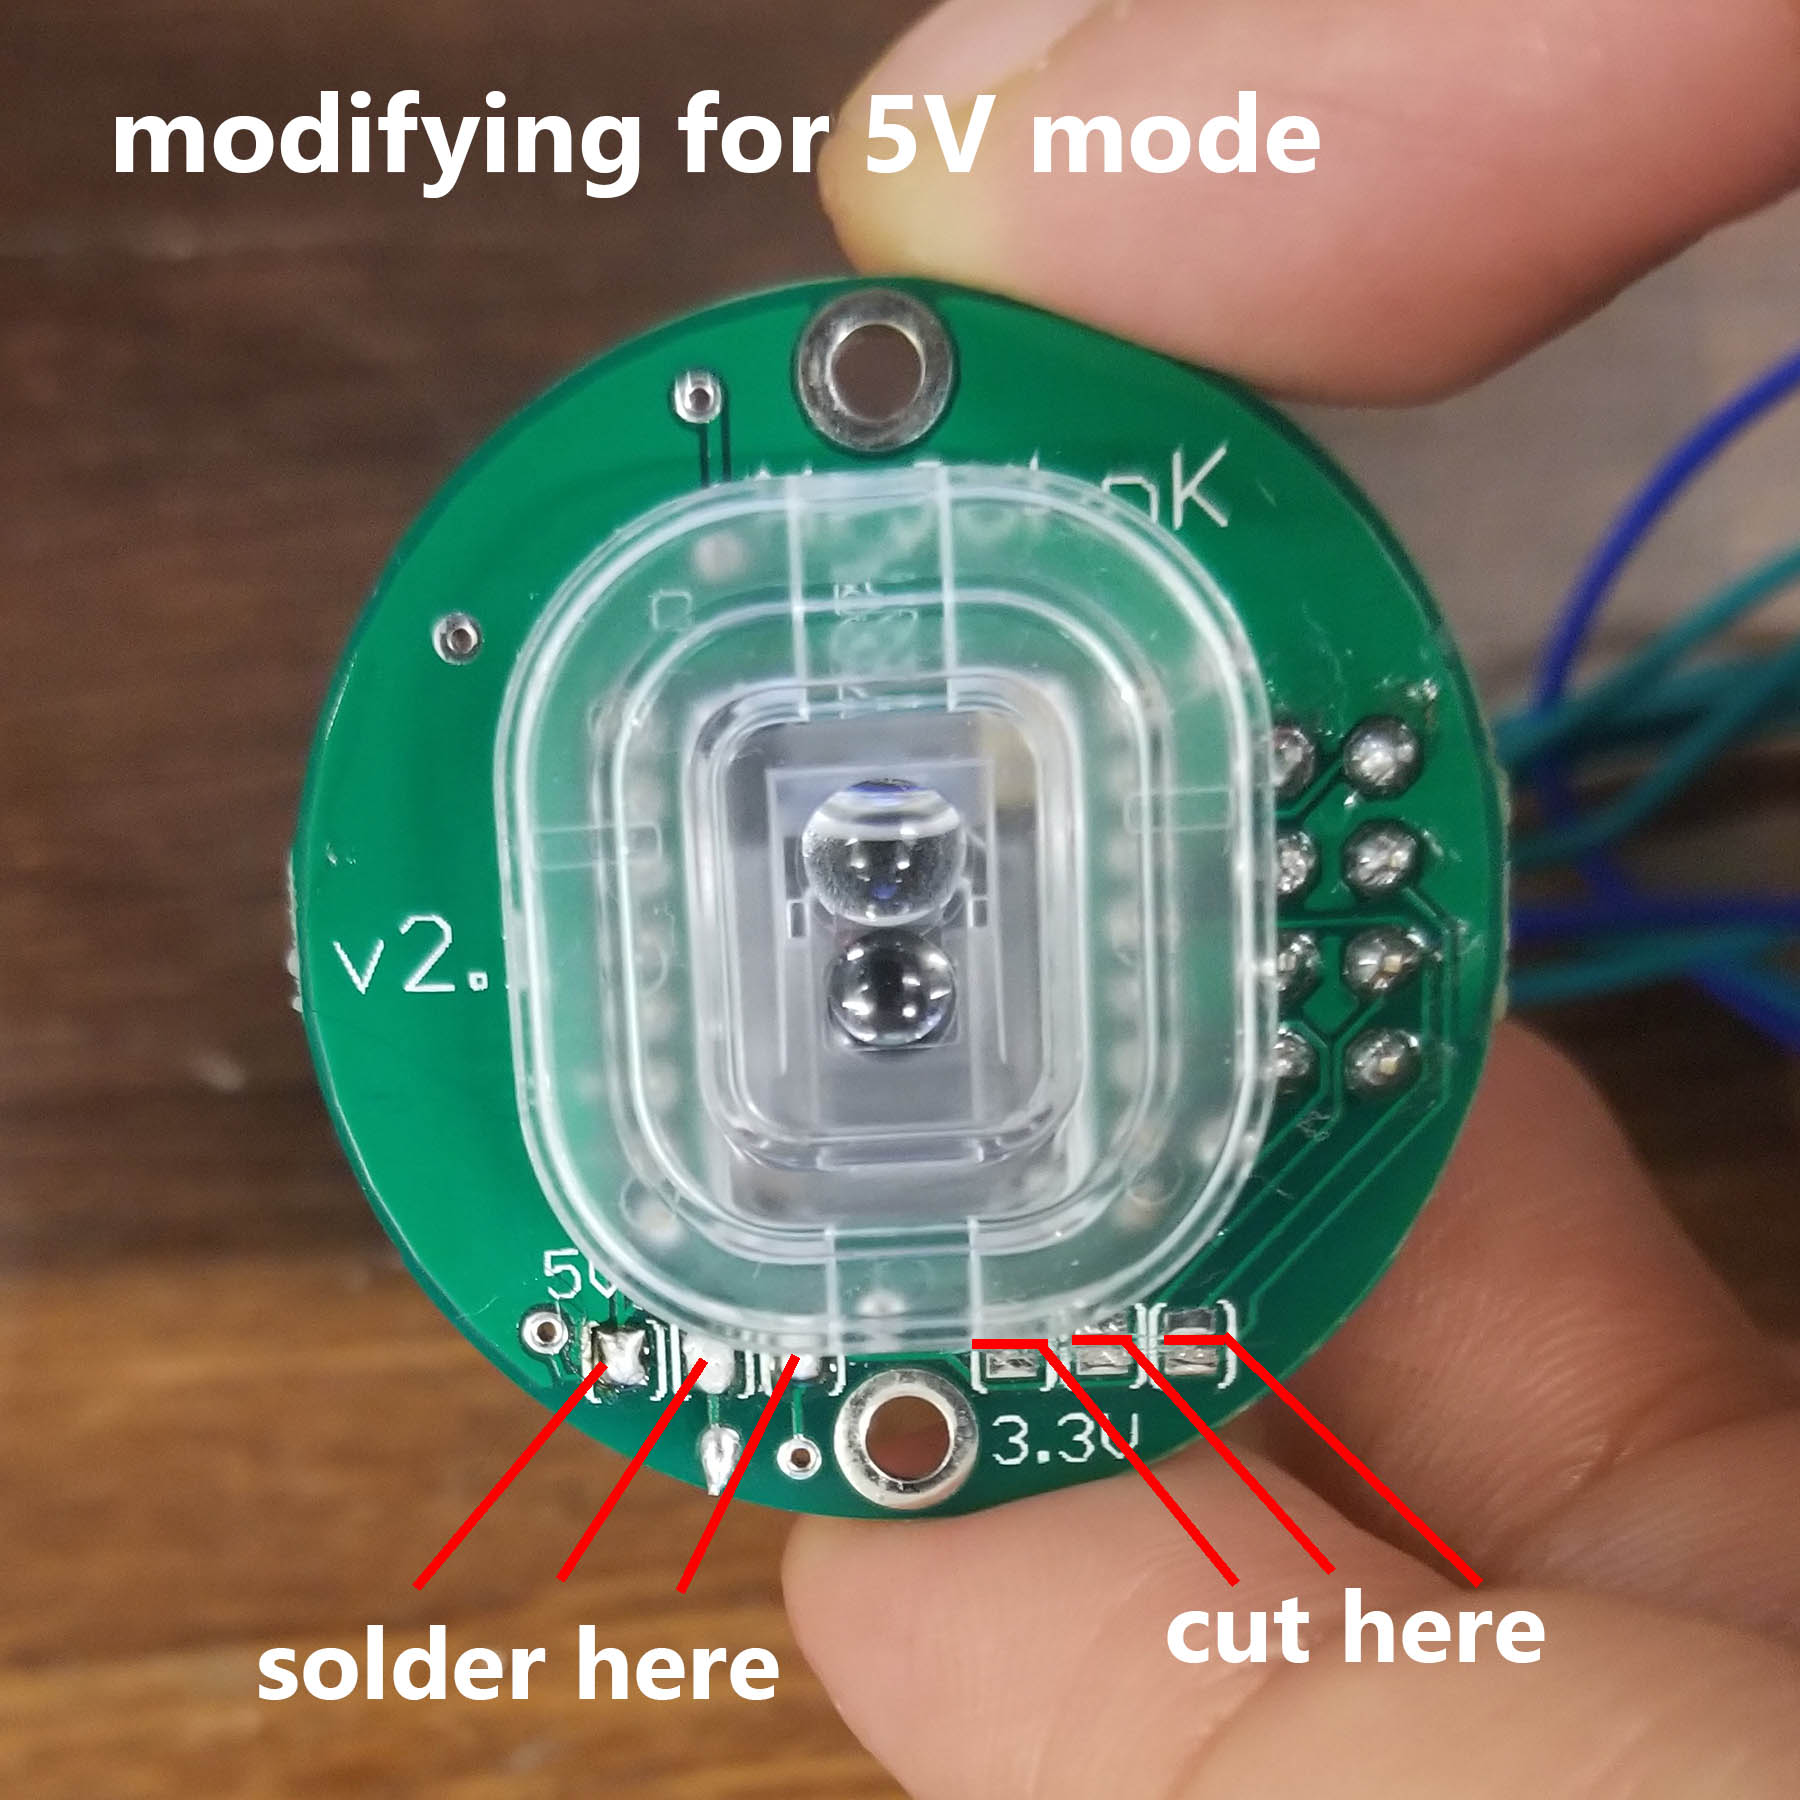 Underside of sensor, showing where to solder and cut